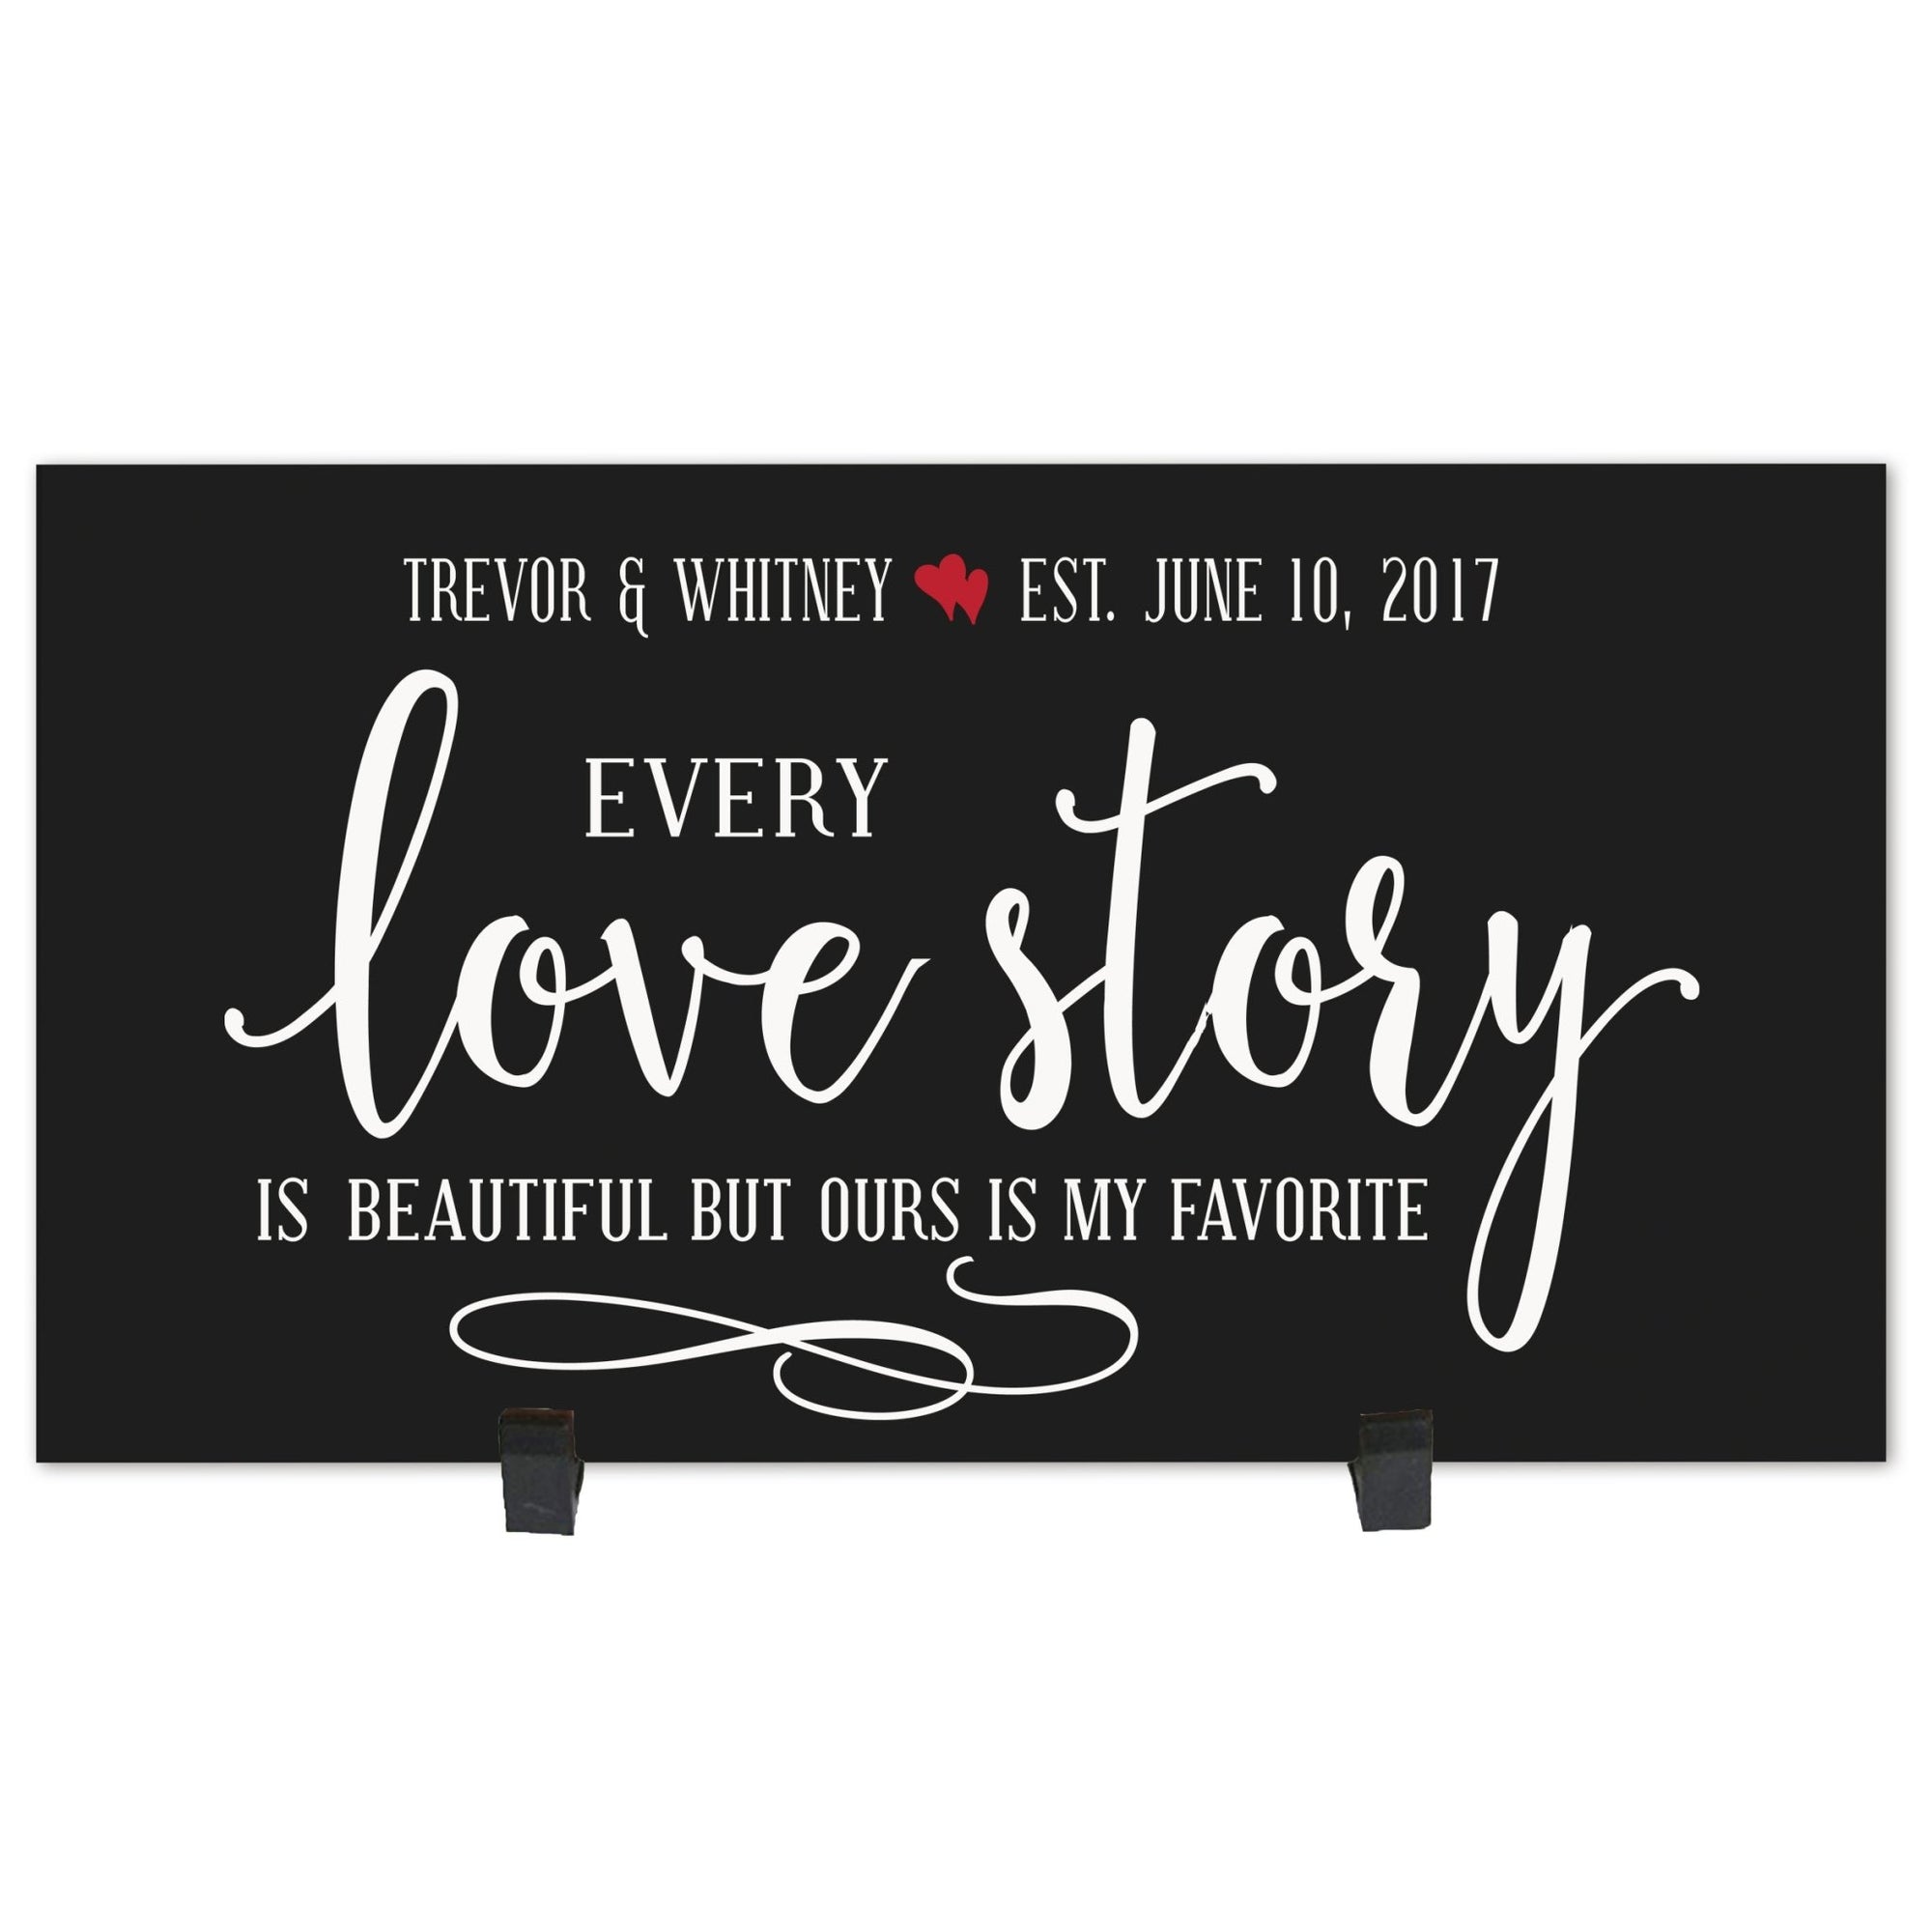 Personalized Family Housewarming Plaque - Every Love Story - LifeSong Milestones